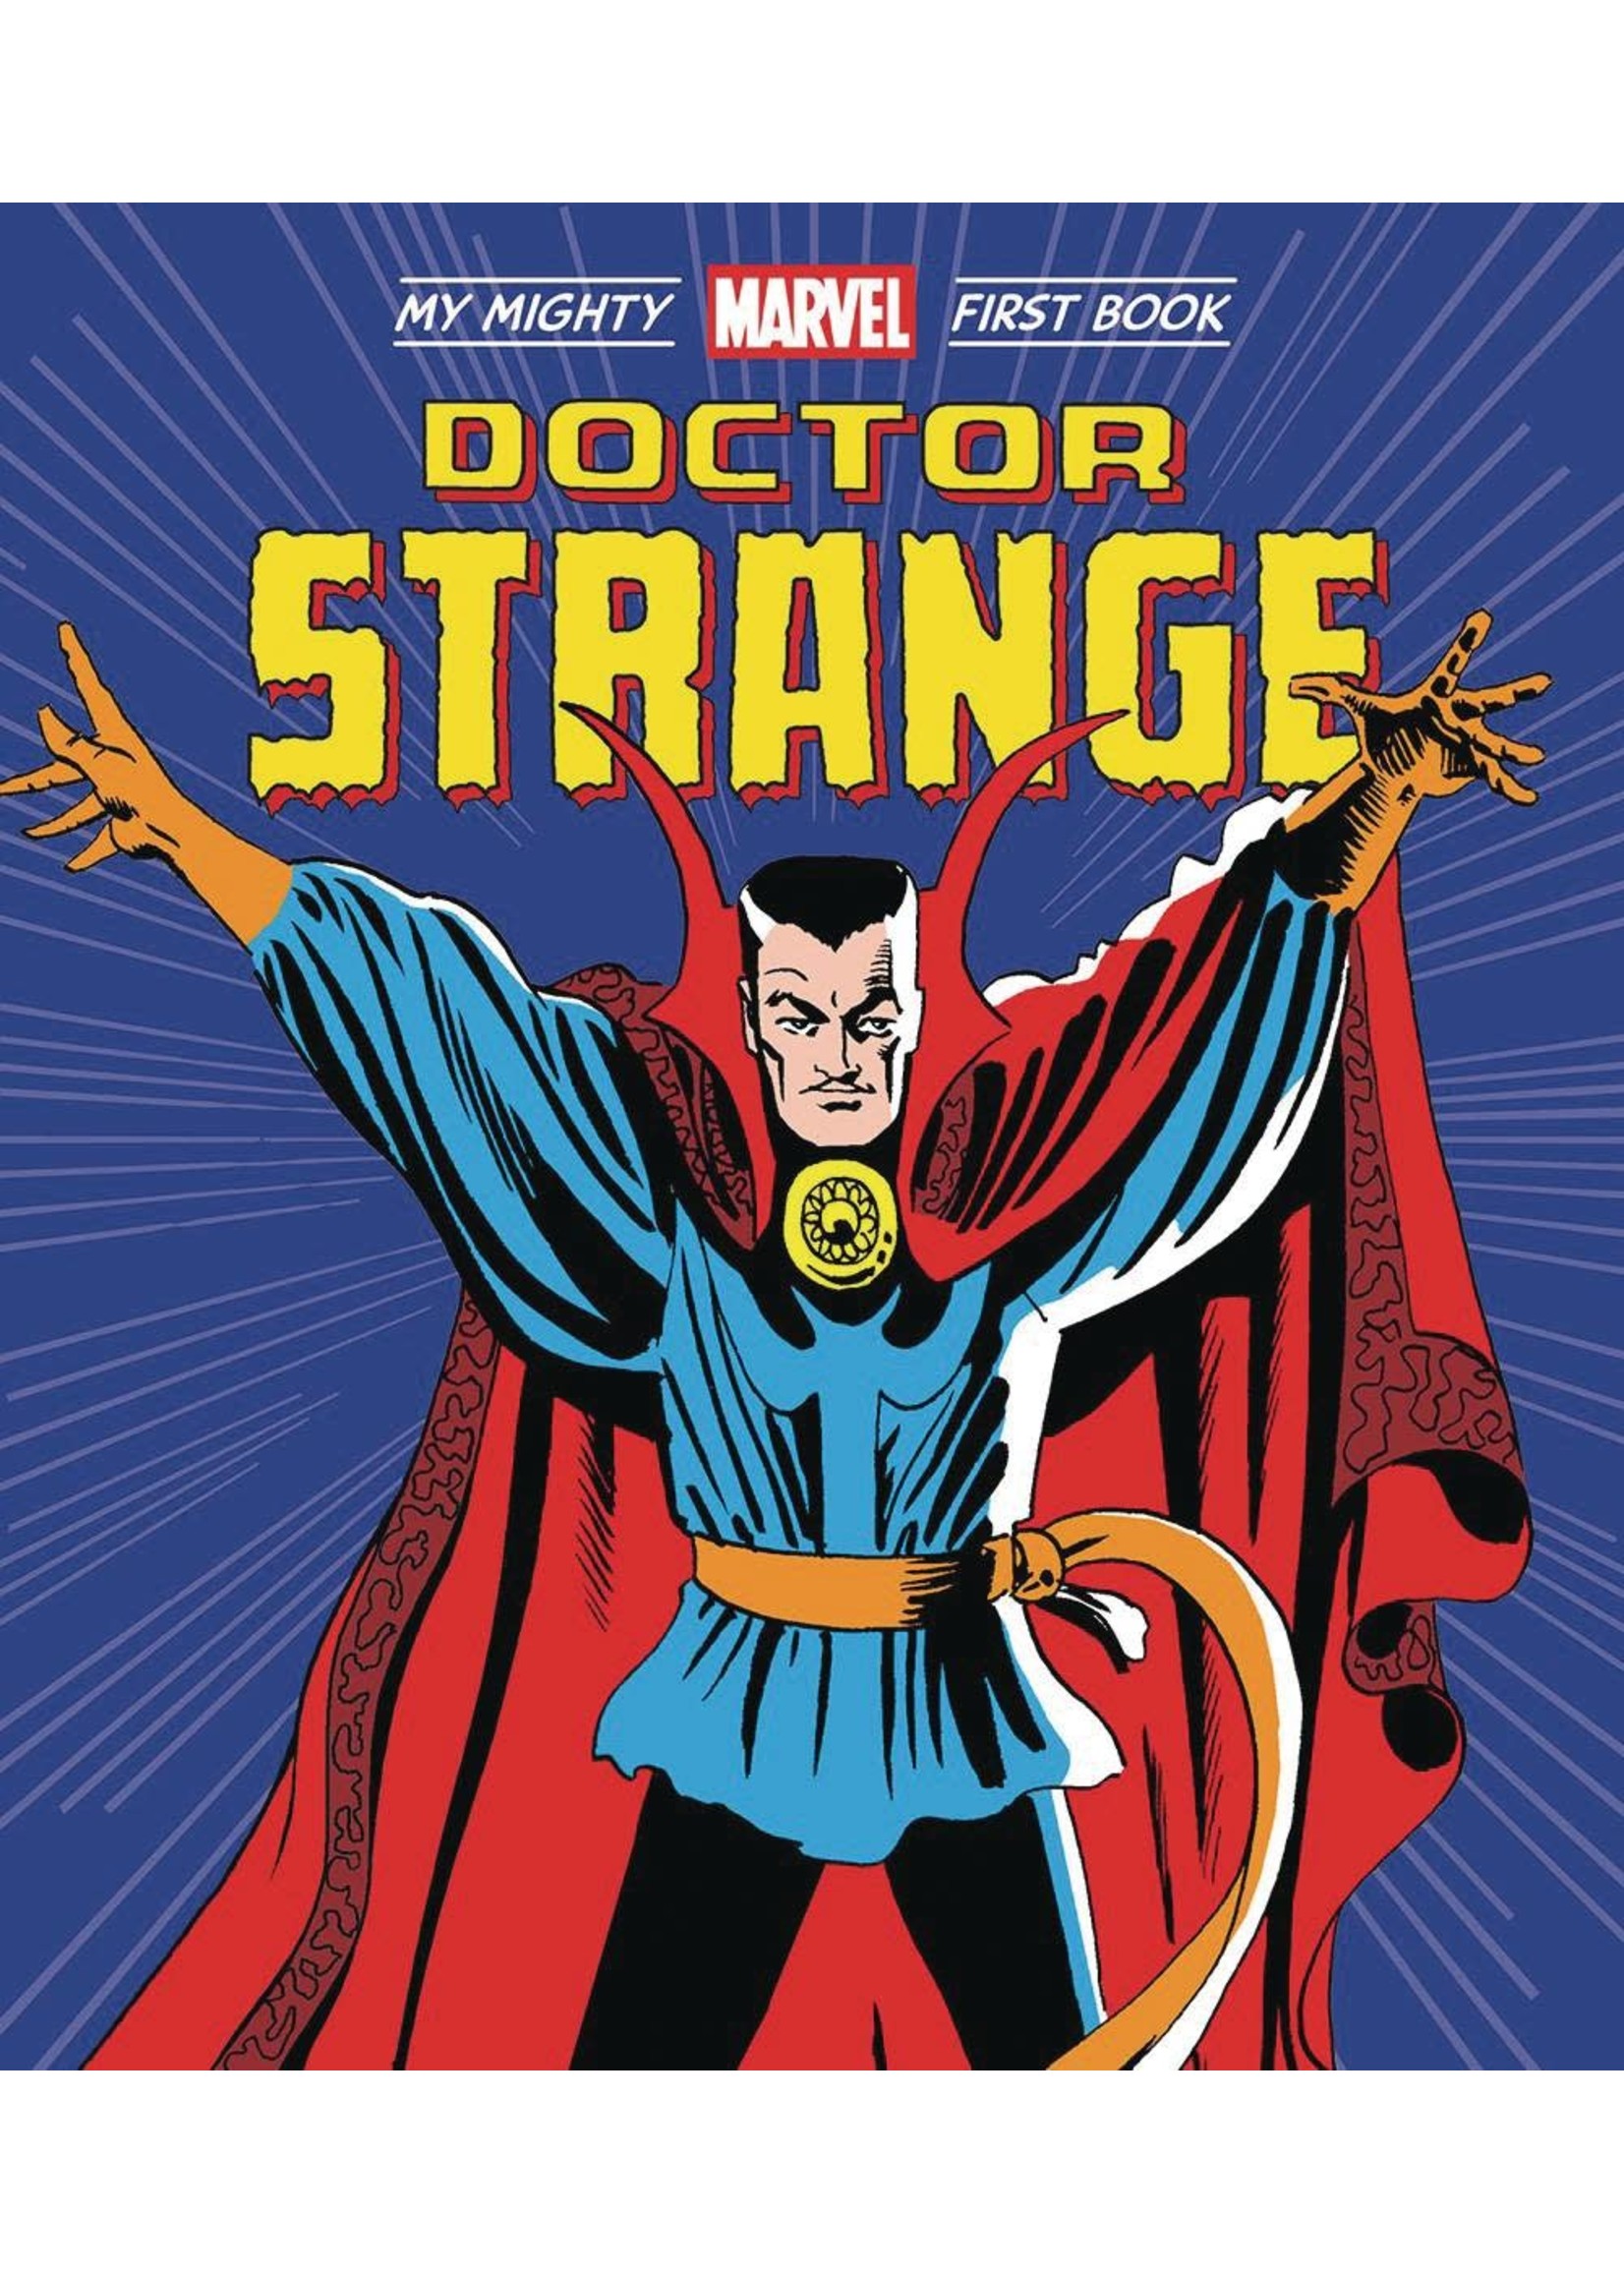 MARVEL COMICS DOCTOR STRANGE MY MIGHTY MARVEL FIRST BOOK BOARD BOOK